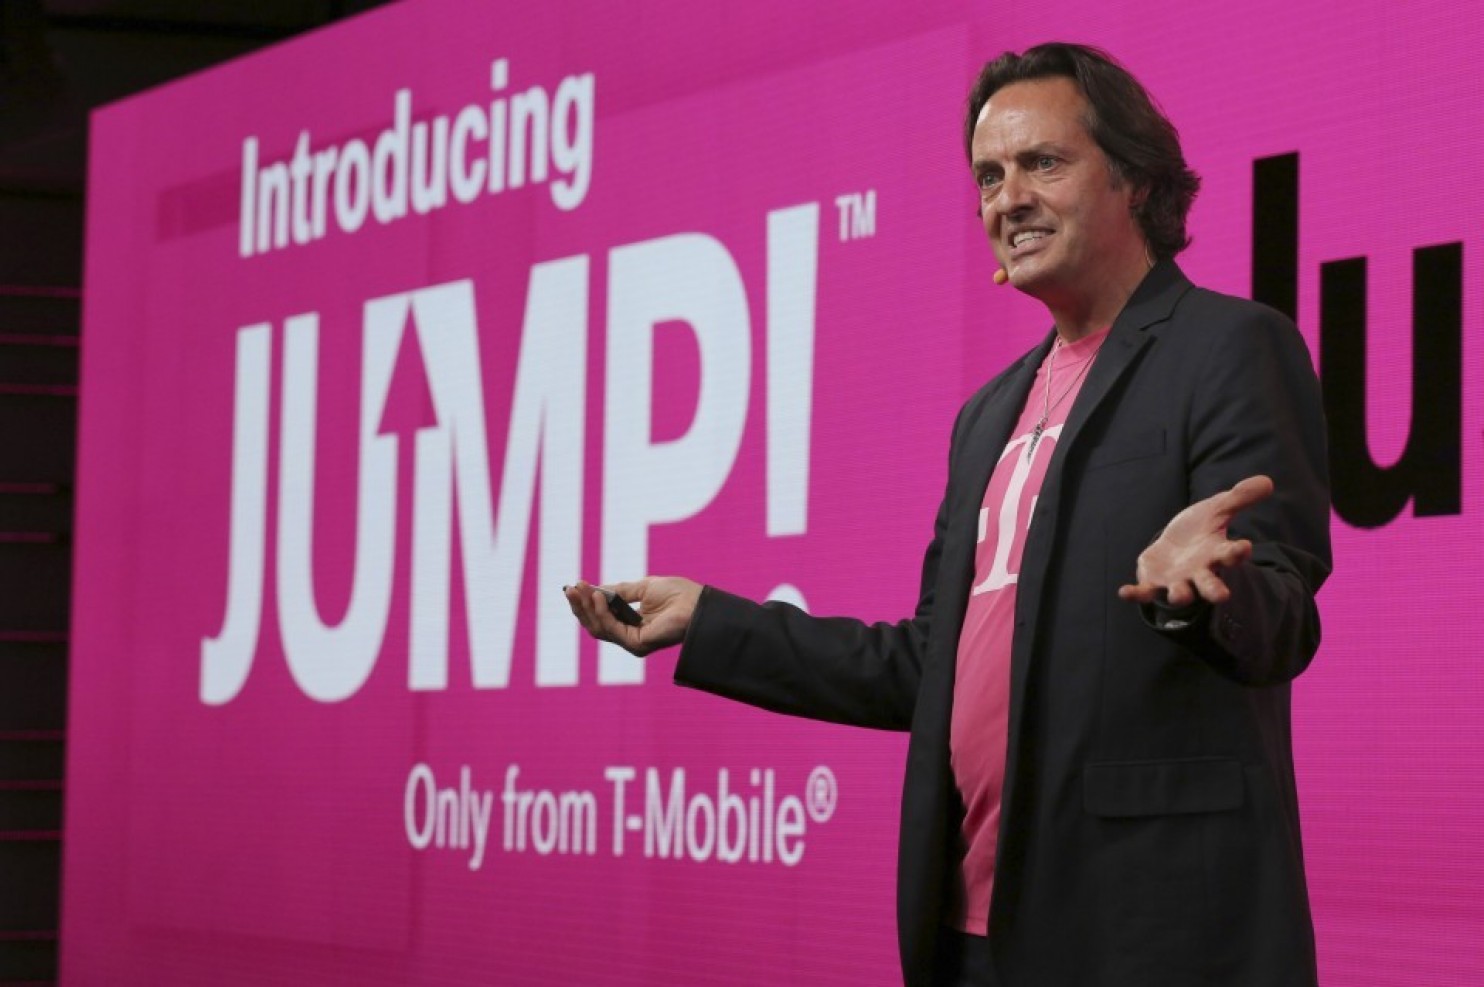 Bank Marketing | What Banks Can Learn From T-Mobile